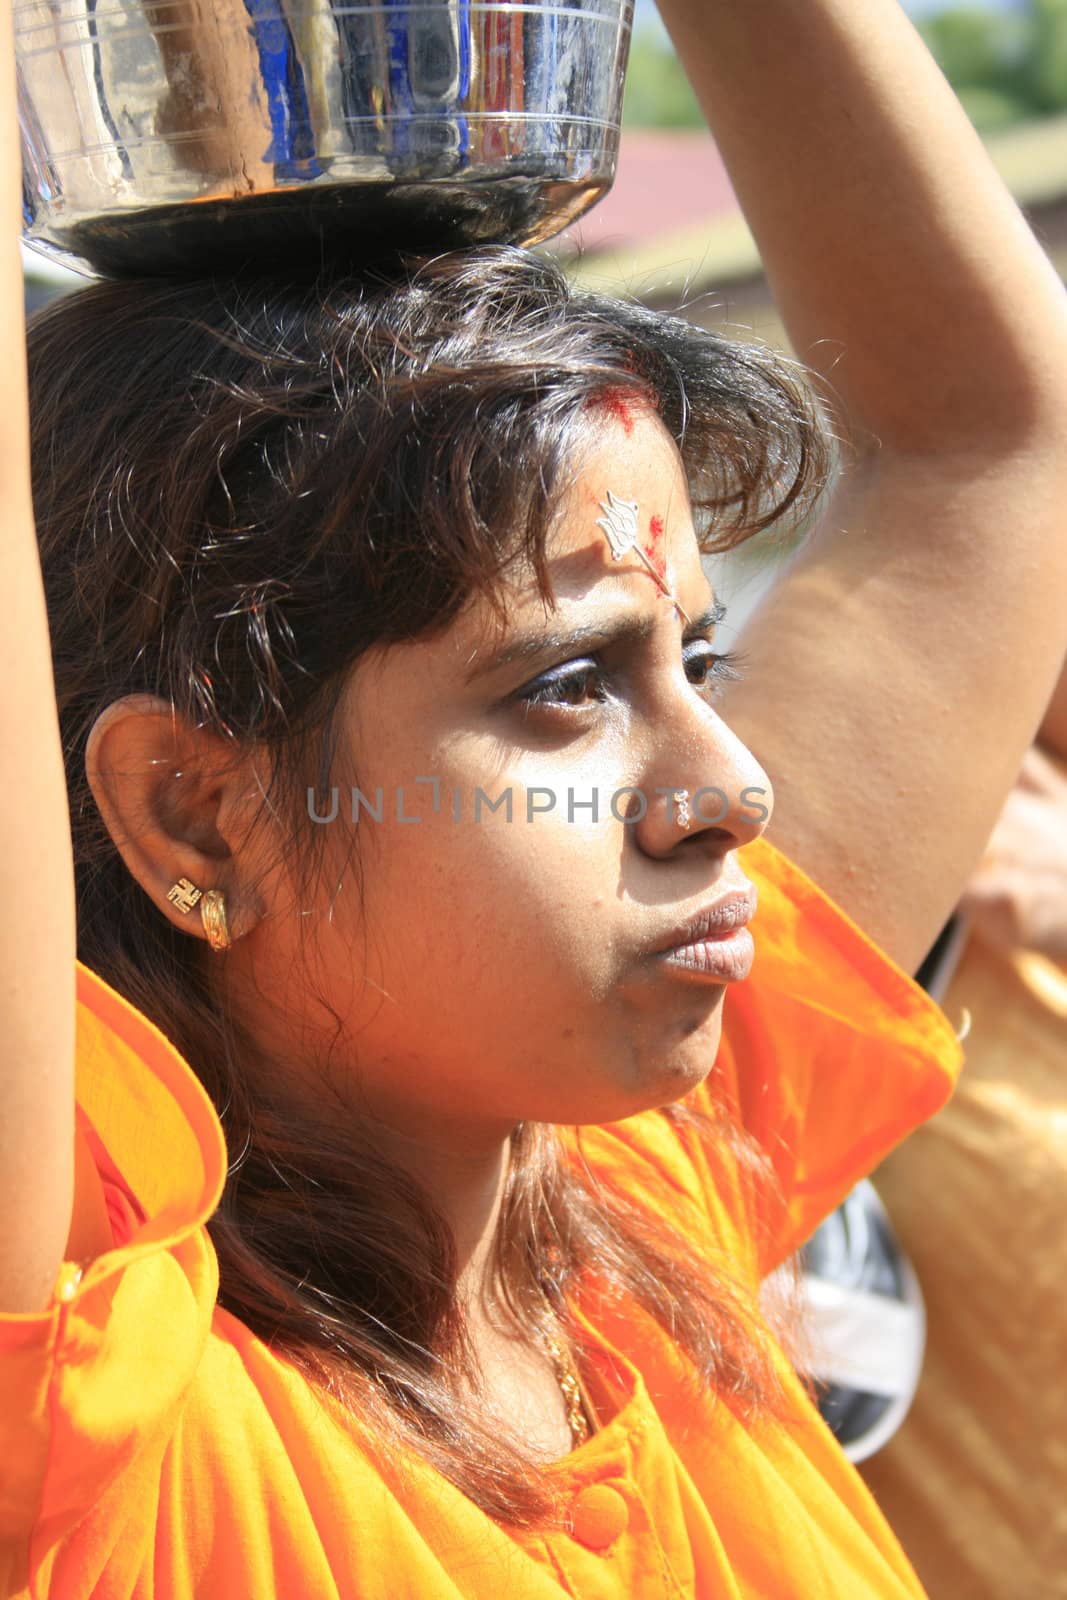 A lady offering milk in Thaipusam celebration in Singapore 2009.